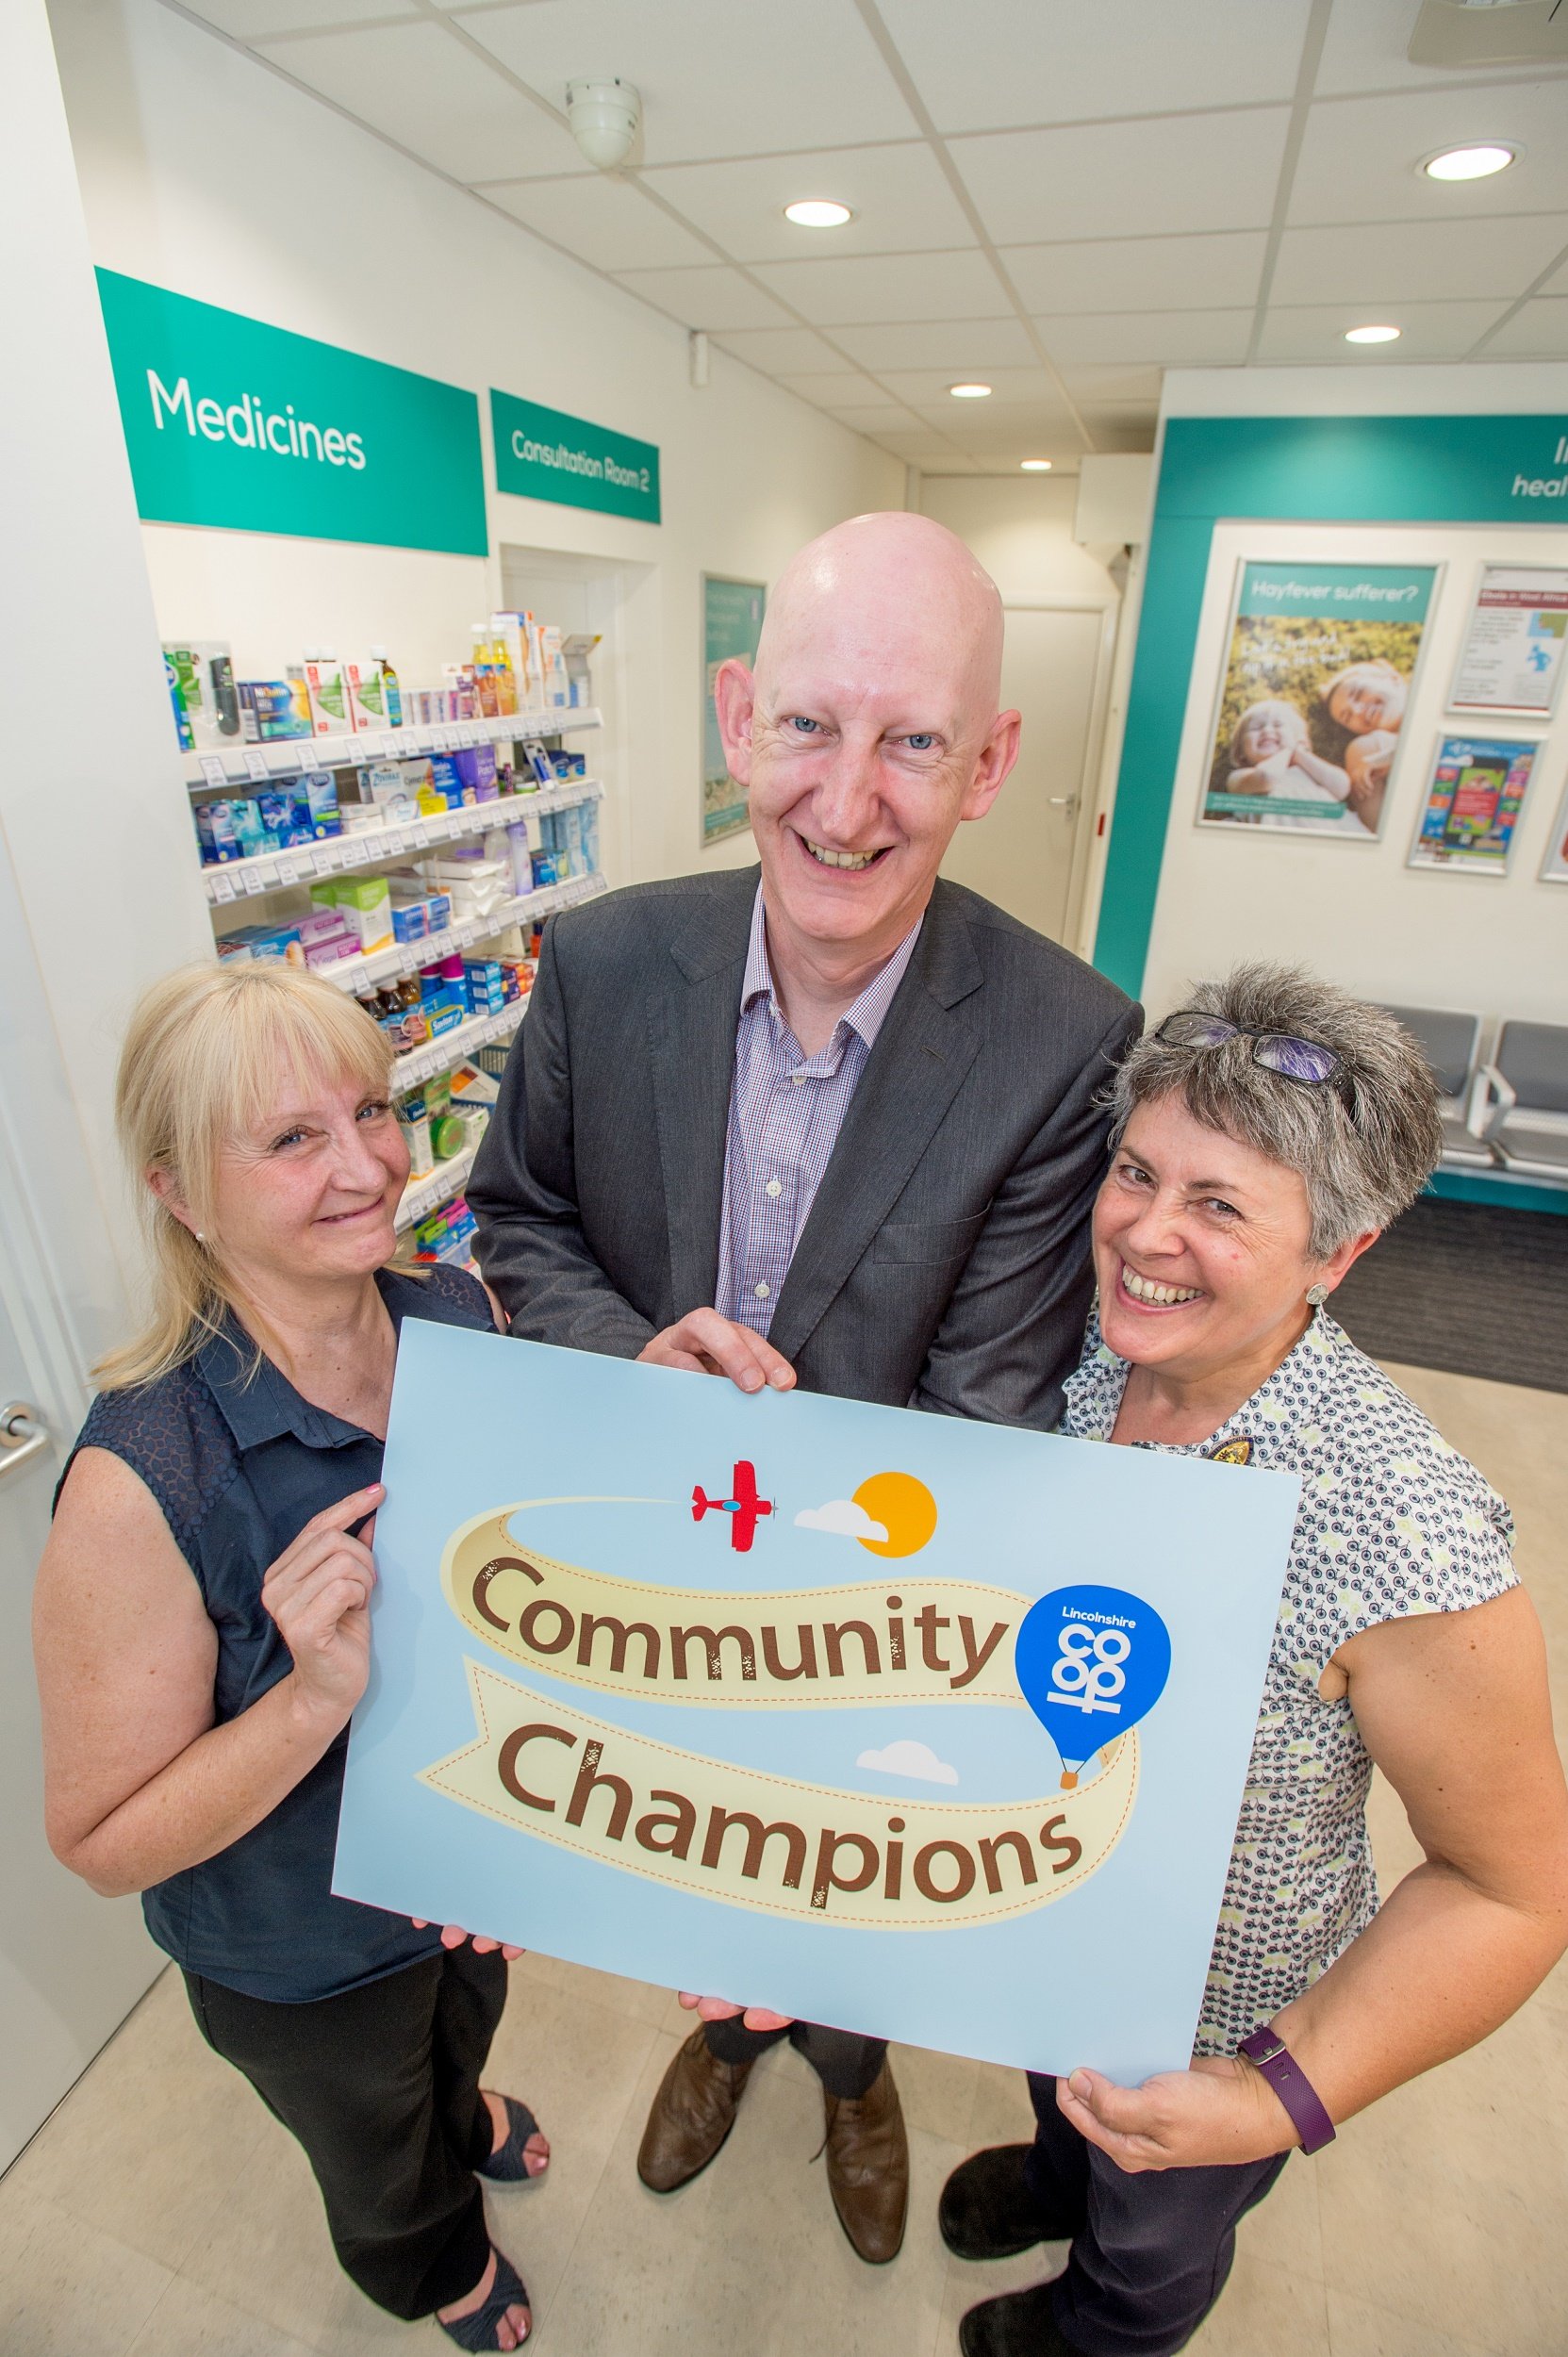 Lincolnshire Co-op donated more than £320, 804 to good causes through the Community Champions scheme. Charities Rethink and Headway benefitted from more than £86,900. Pictured from left are Rethink’s Helen Doyle, Lincolnshire Co-op Head of Pharmacy Alastair Farquhar and Headway’s Jane Reams